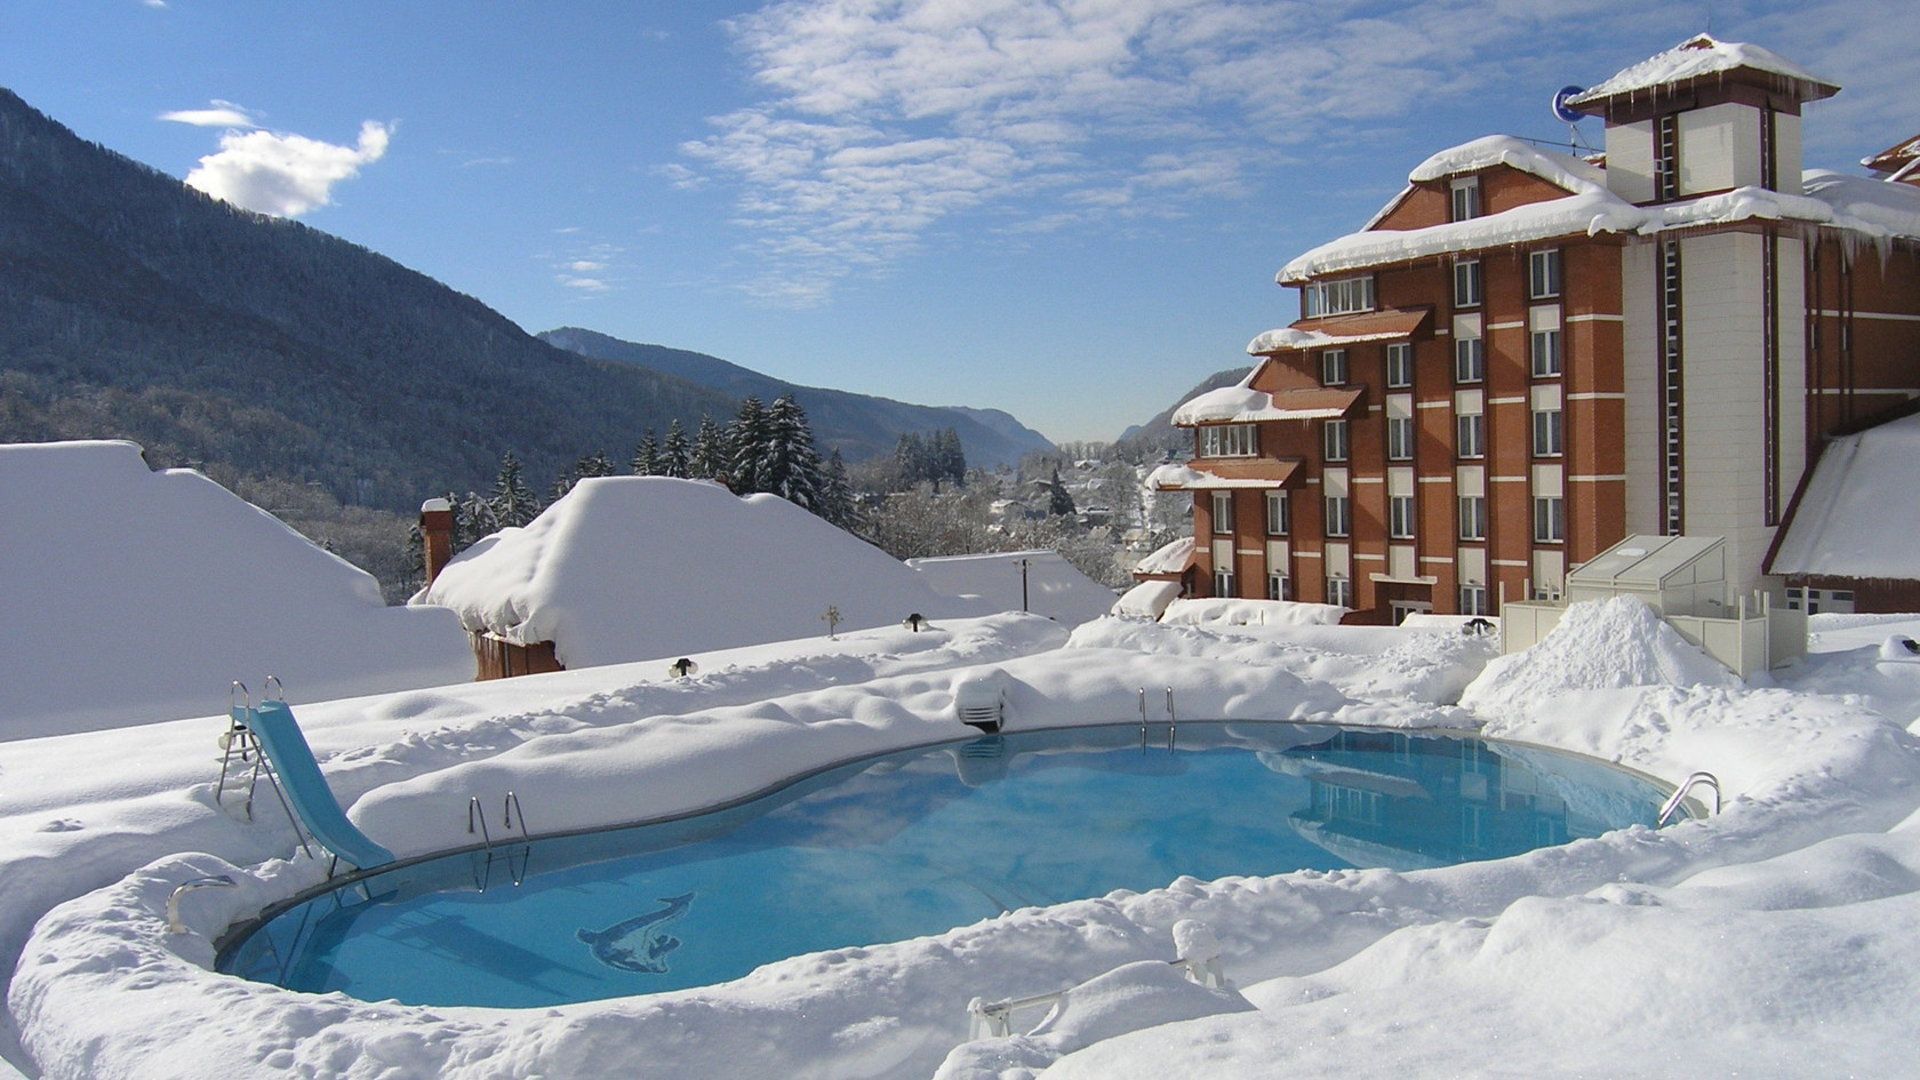 Other Beautiful Hotel Pool Middle Winter Mountains Desktop